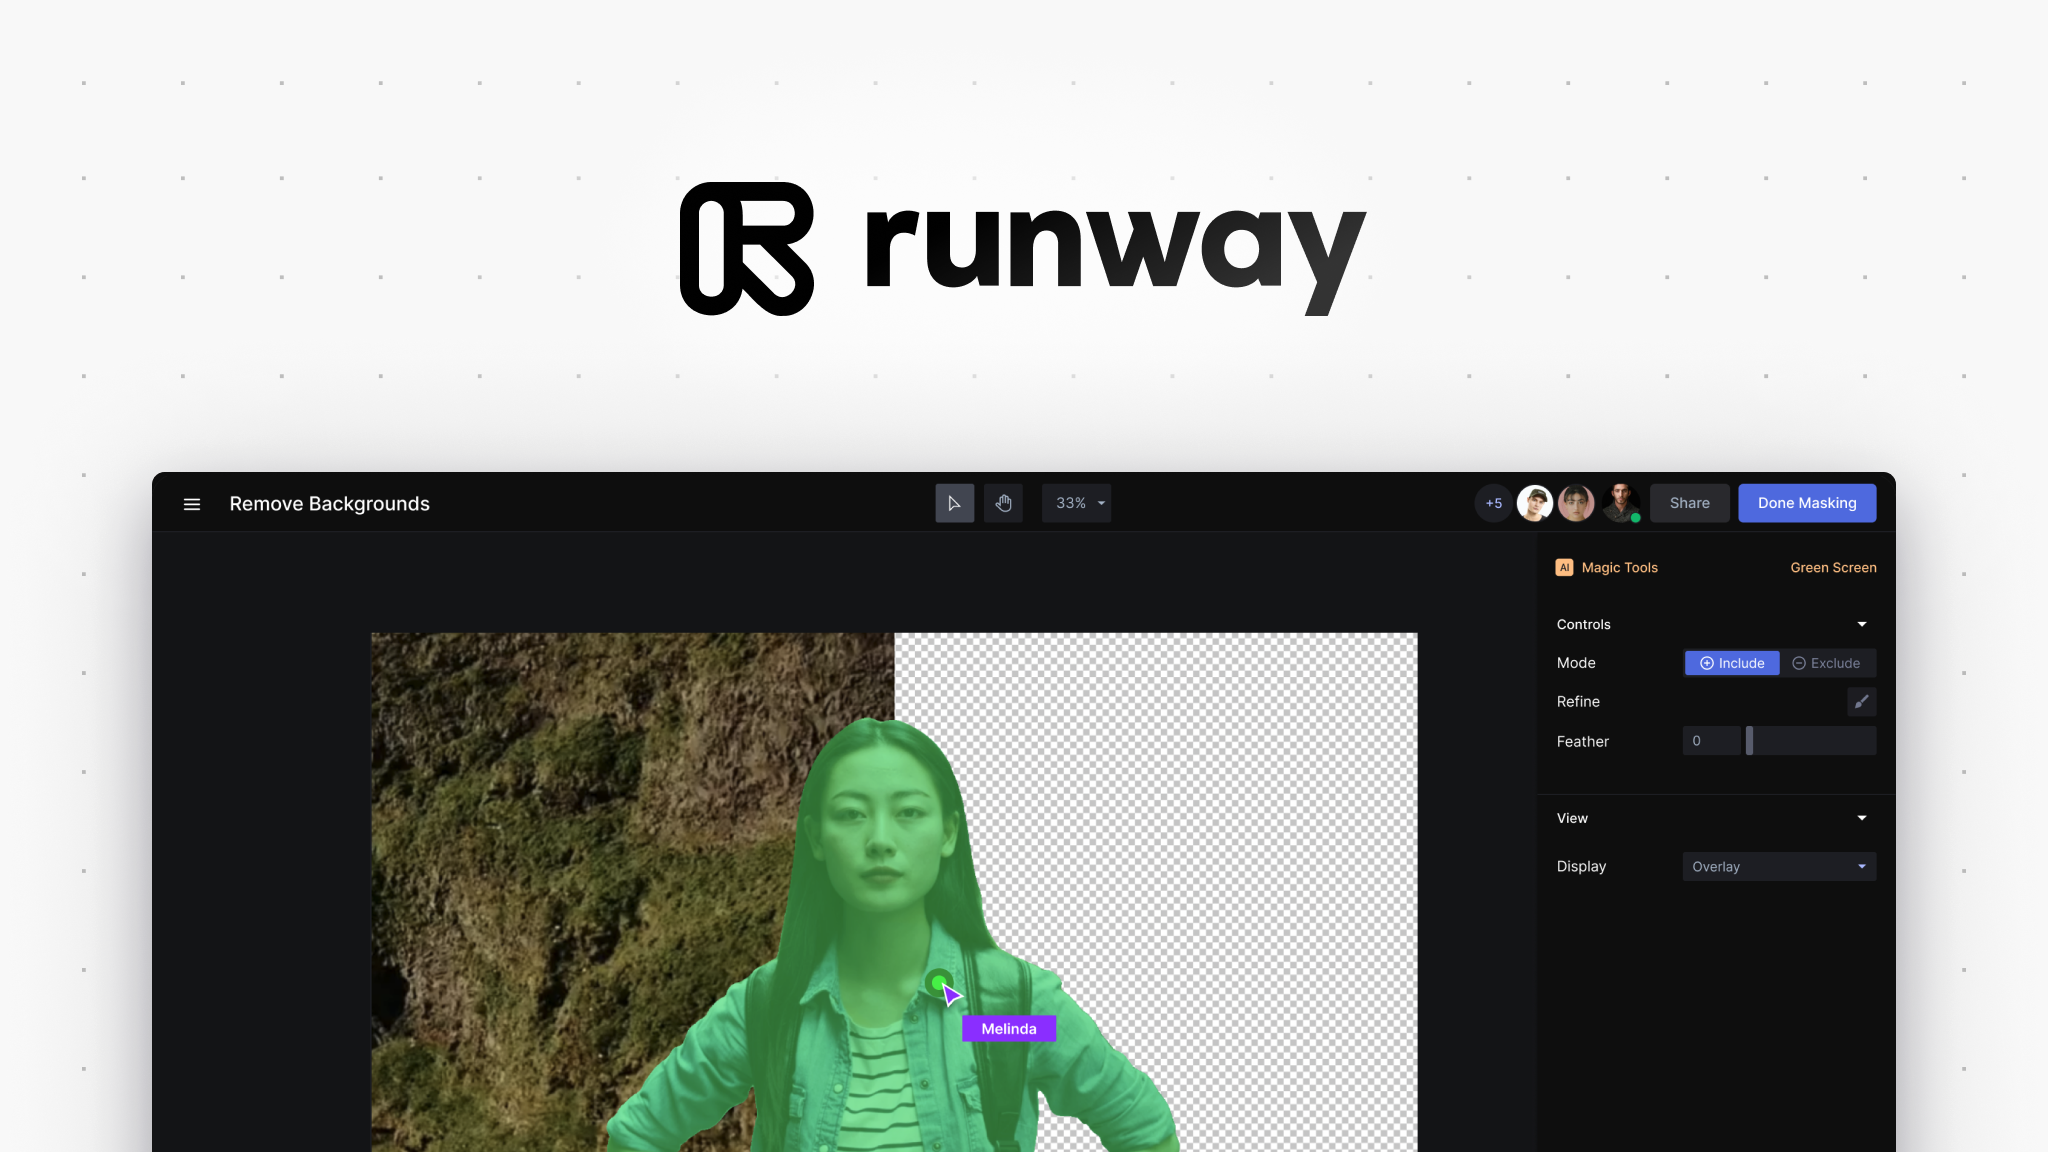 Runway uses Liveblocks for real‑time collaboration to stay focused on their core product